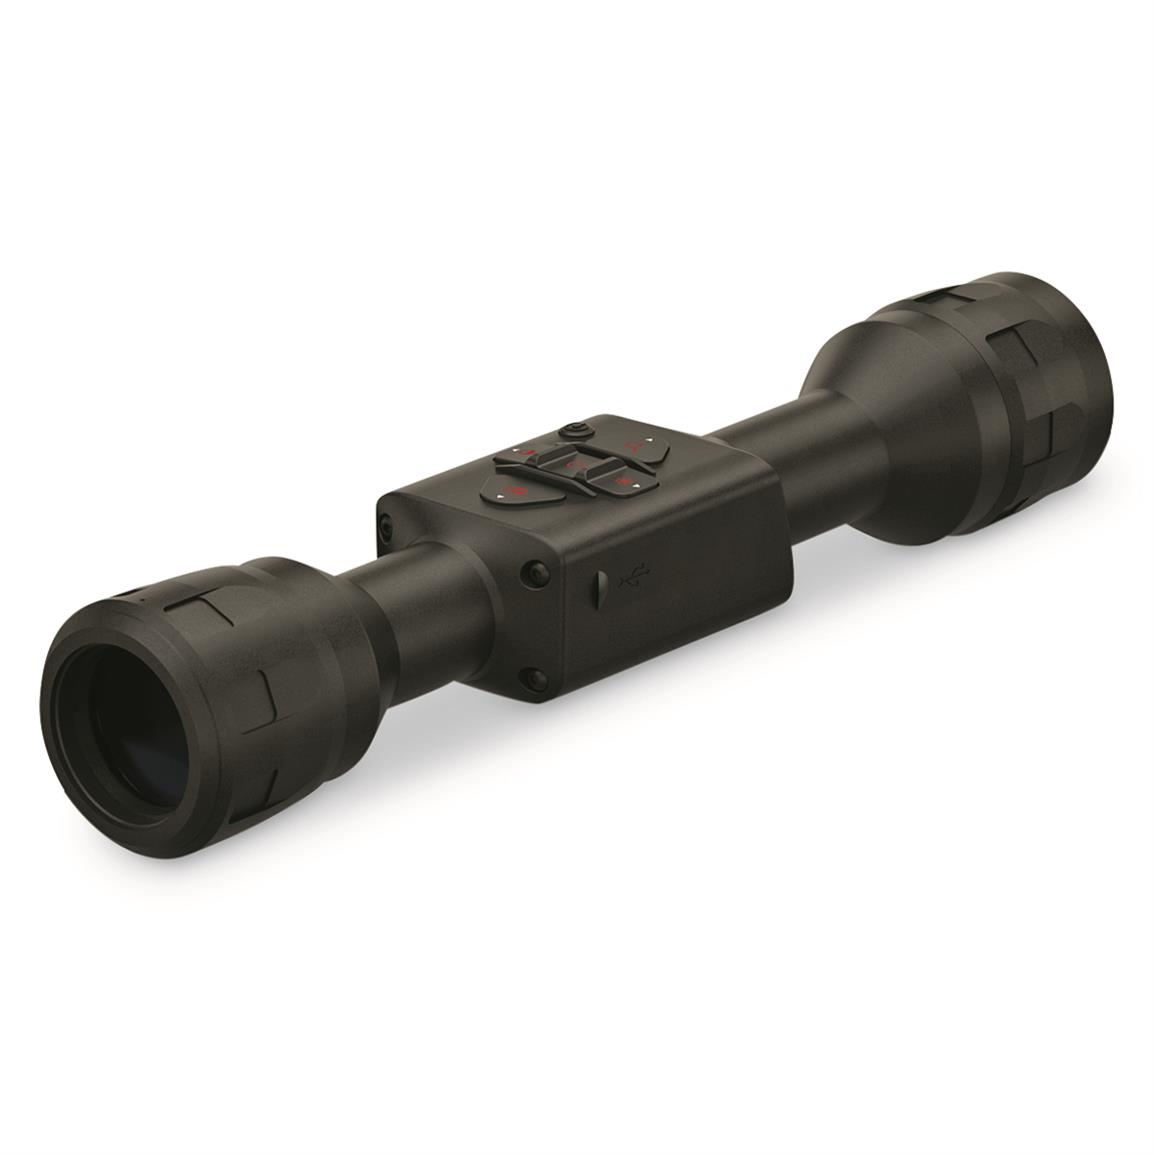 ATN ThOR LTV 160 3-9x Thermal Rifle Scope with Video Recording